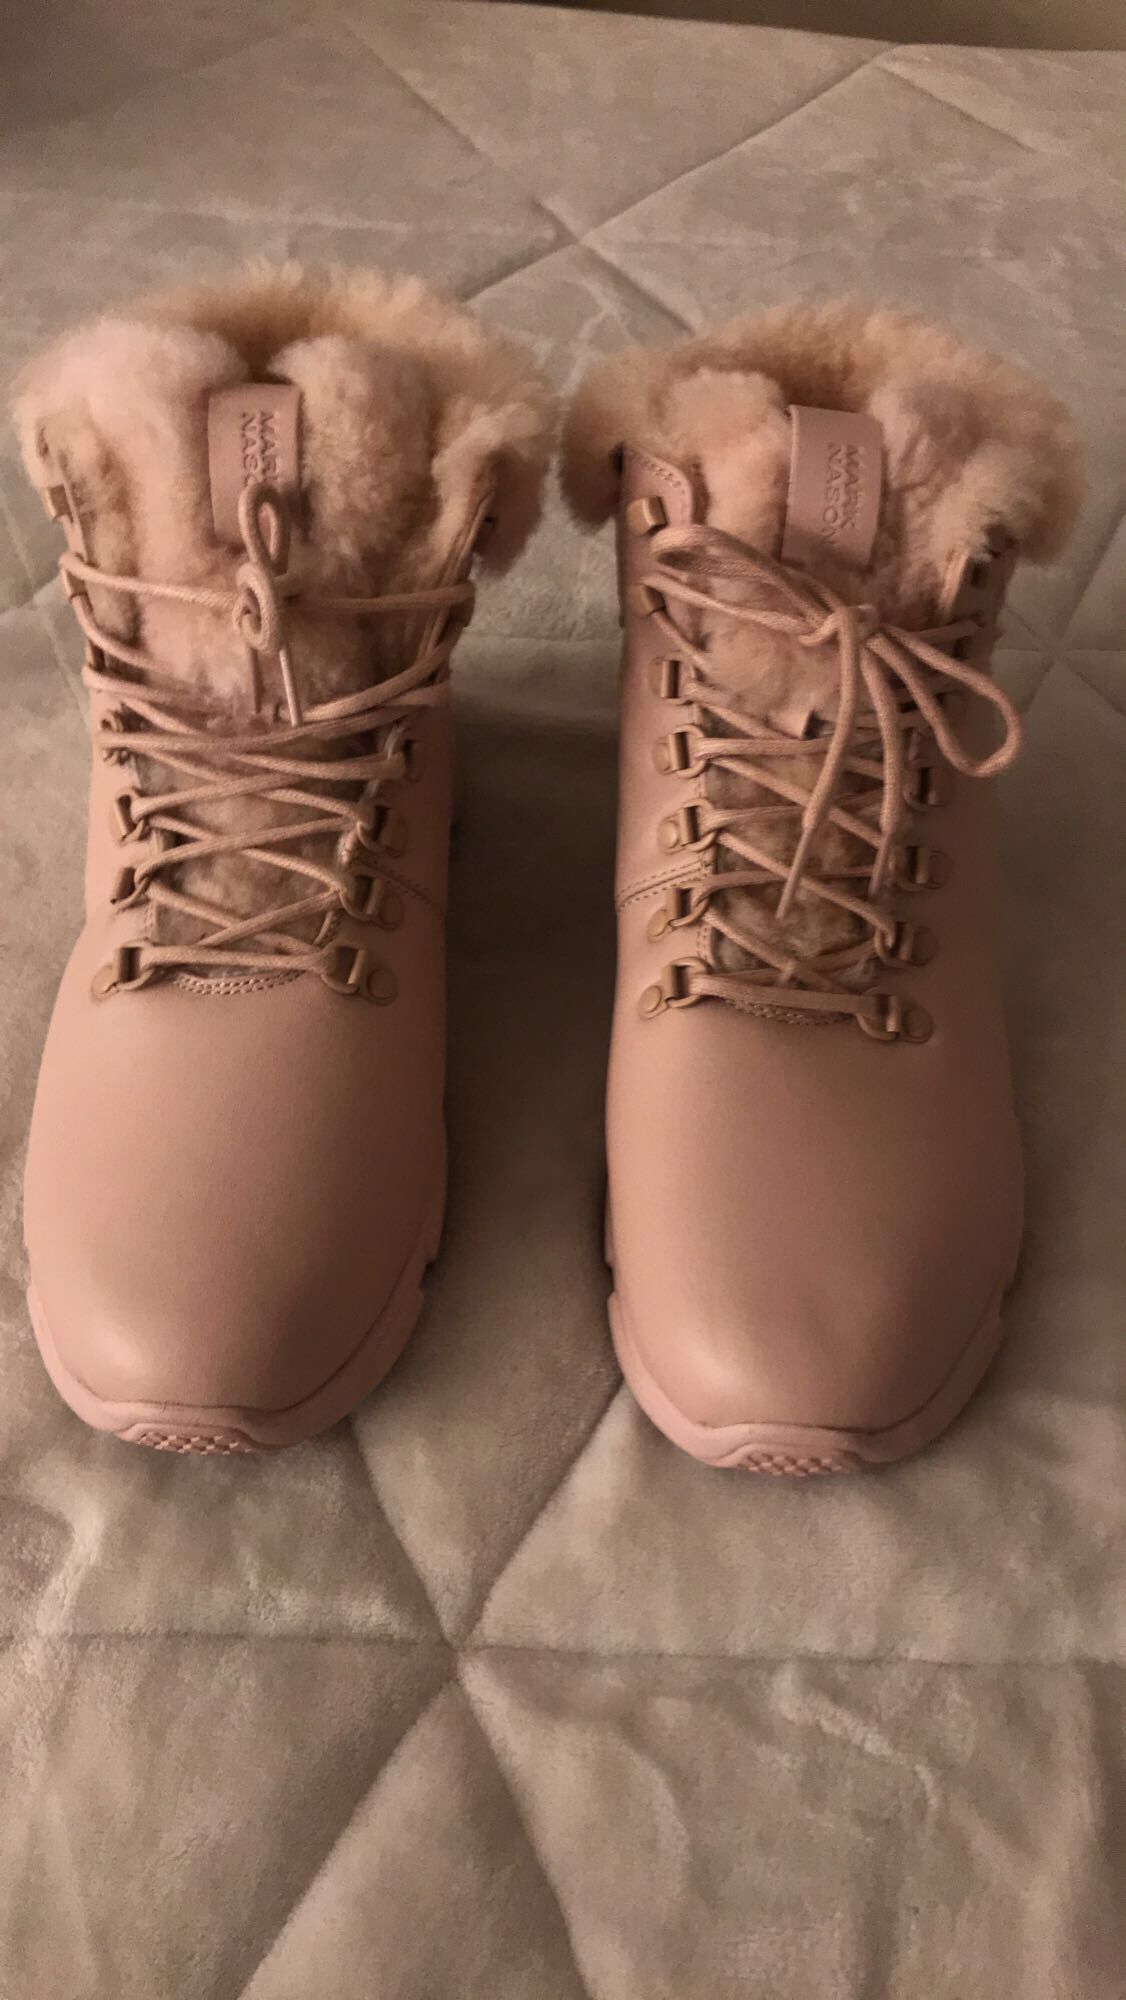 Pink Fur Boots 